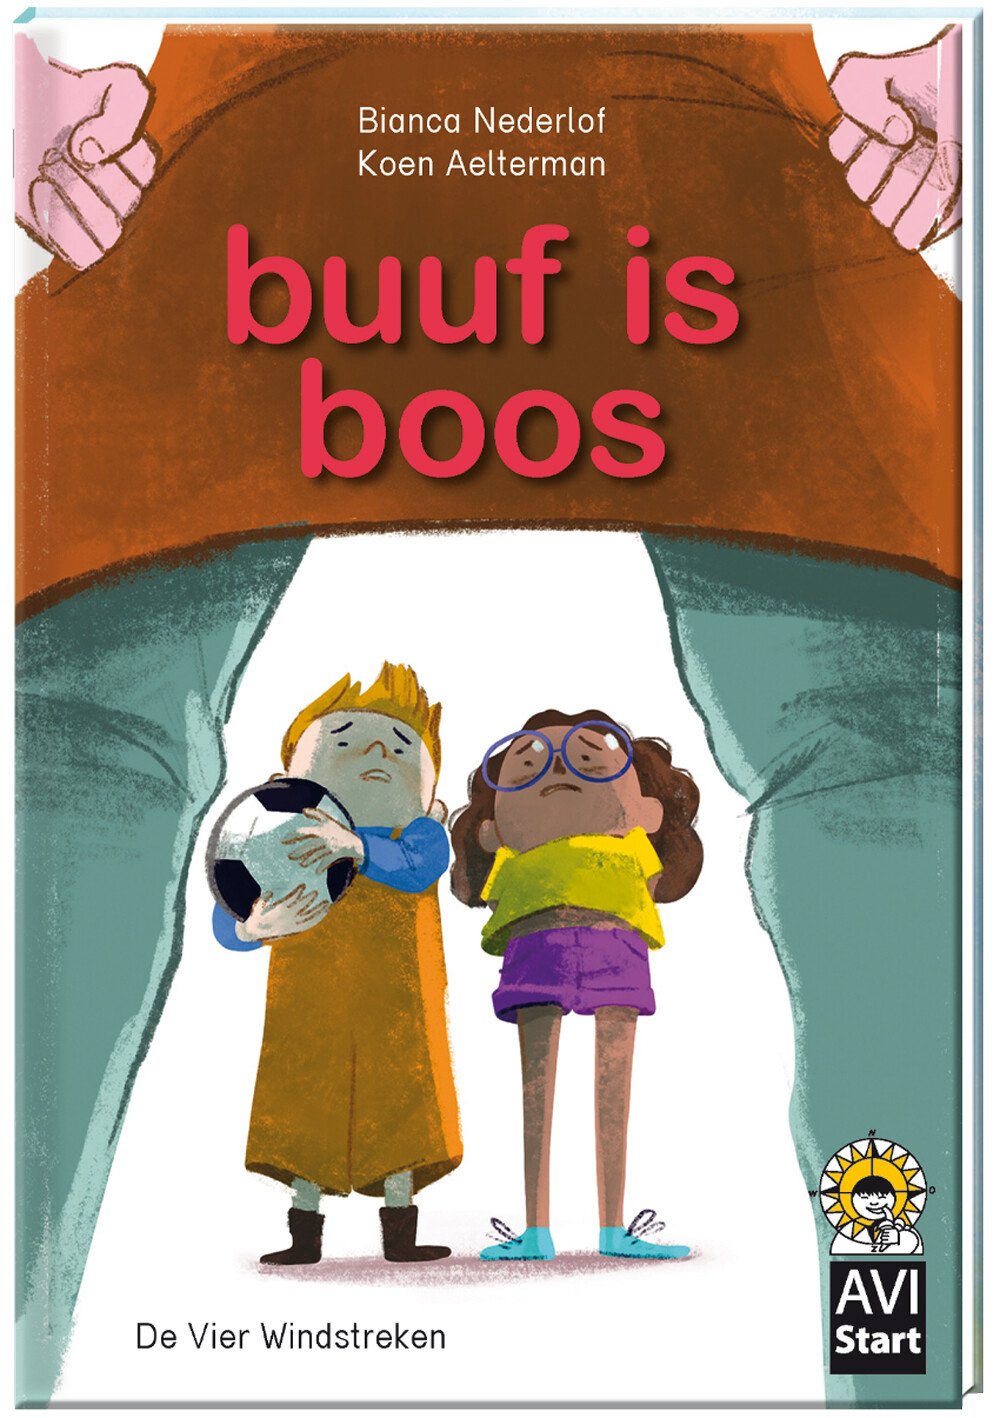 buuf is boos